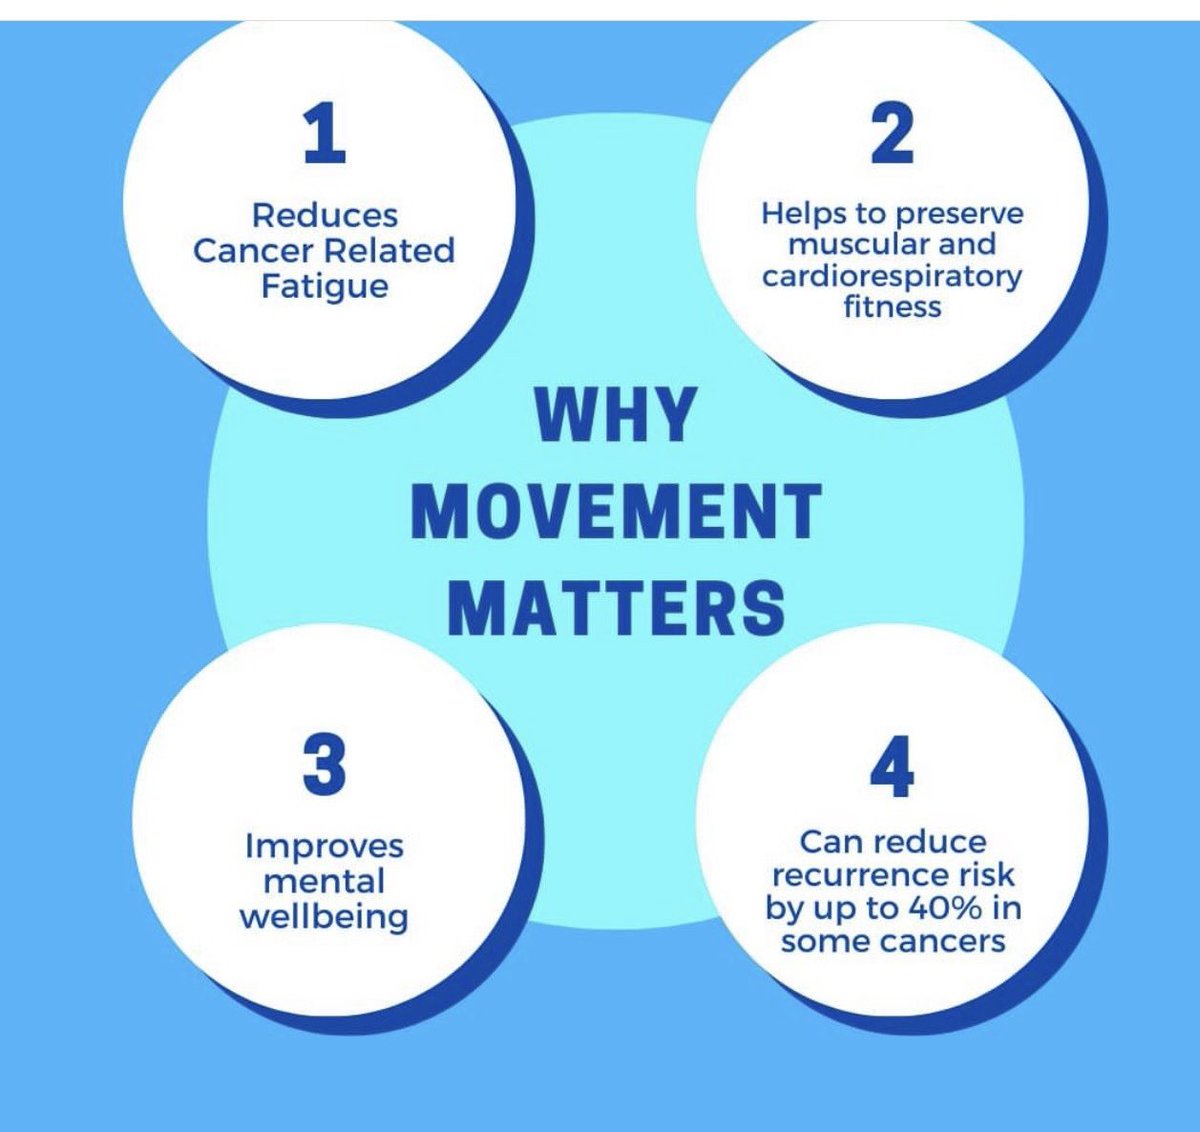 Delighted to have had the opportunity to speak at national GPN webinar today sharing our work with this important nursing community. Thank you to Sophie @MOVEcharity for sharing her inspirational story. #movementmatters #moveagainstcancer @NHSEngland @teamCNO_ @WeGPNs